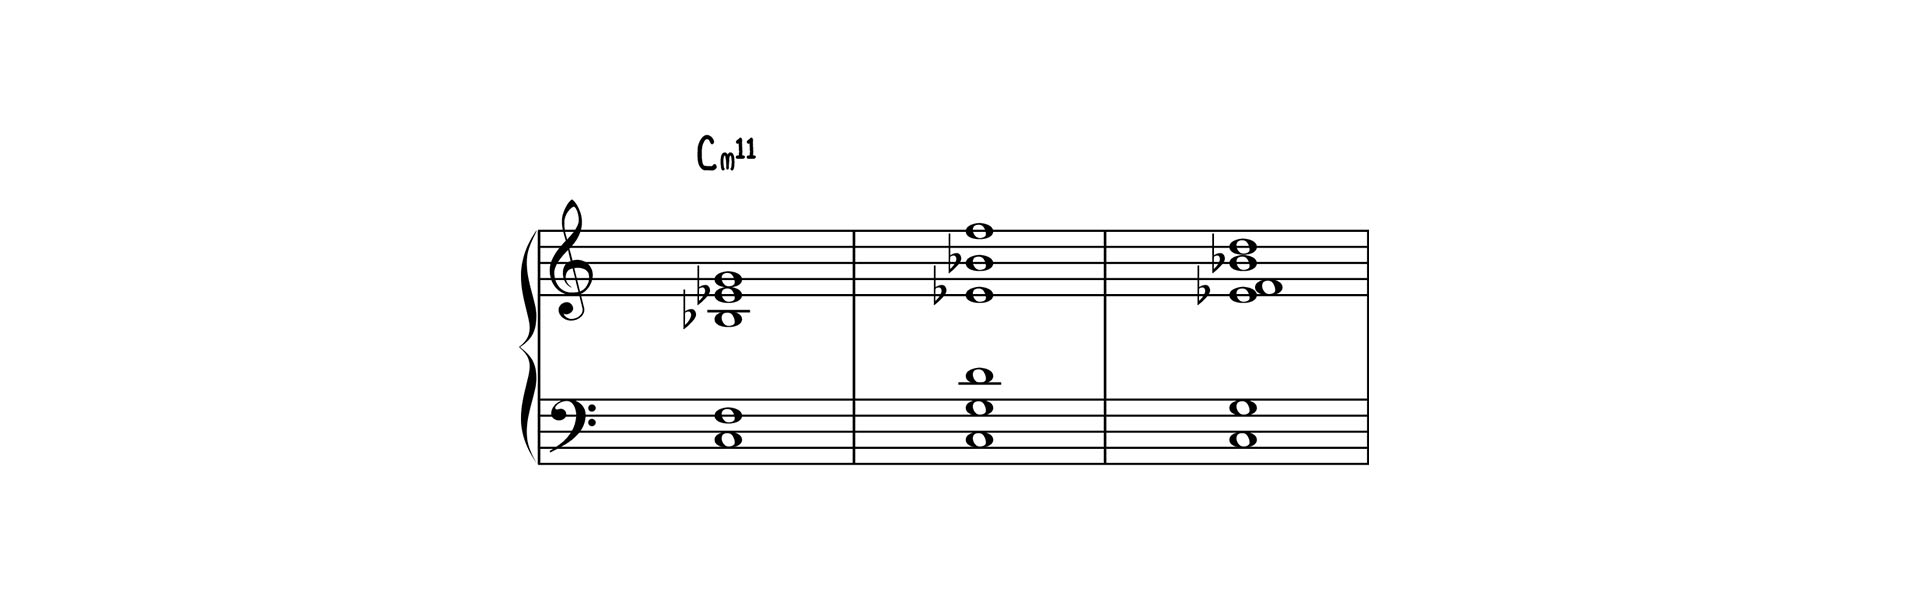 minor 11th chord voicings